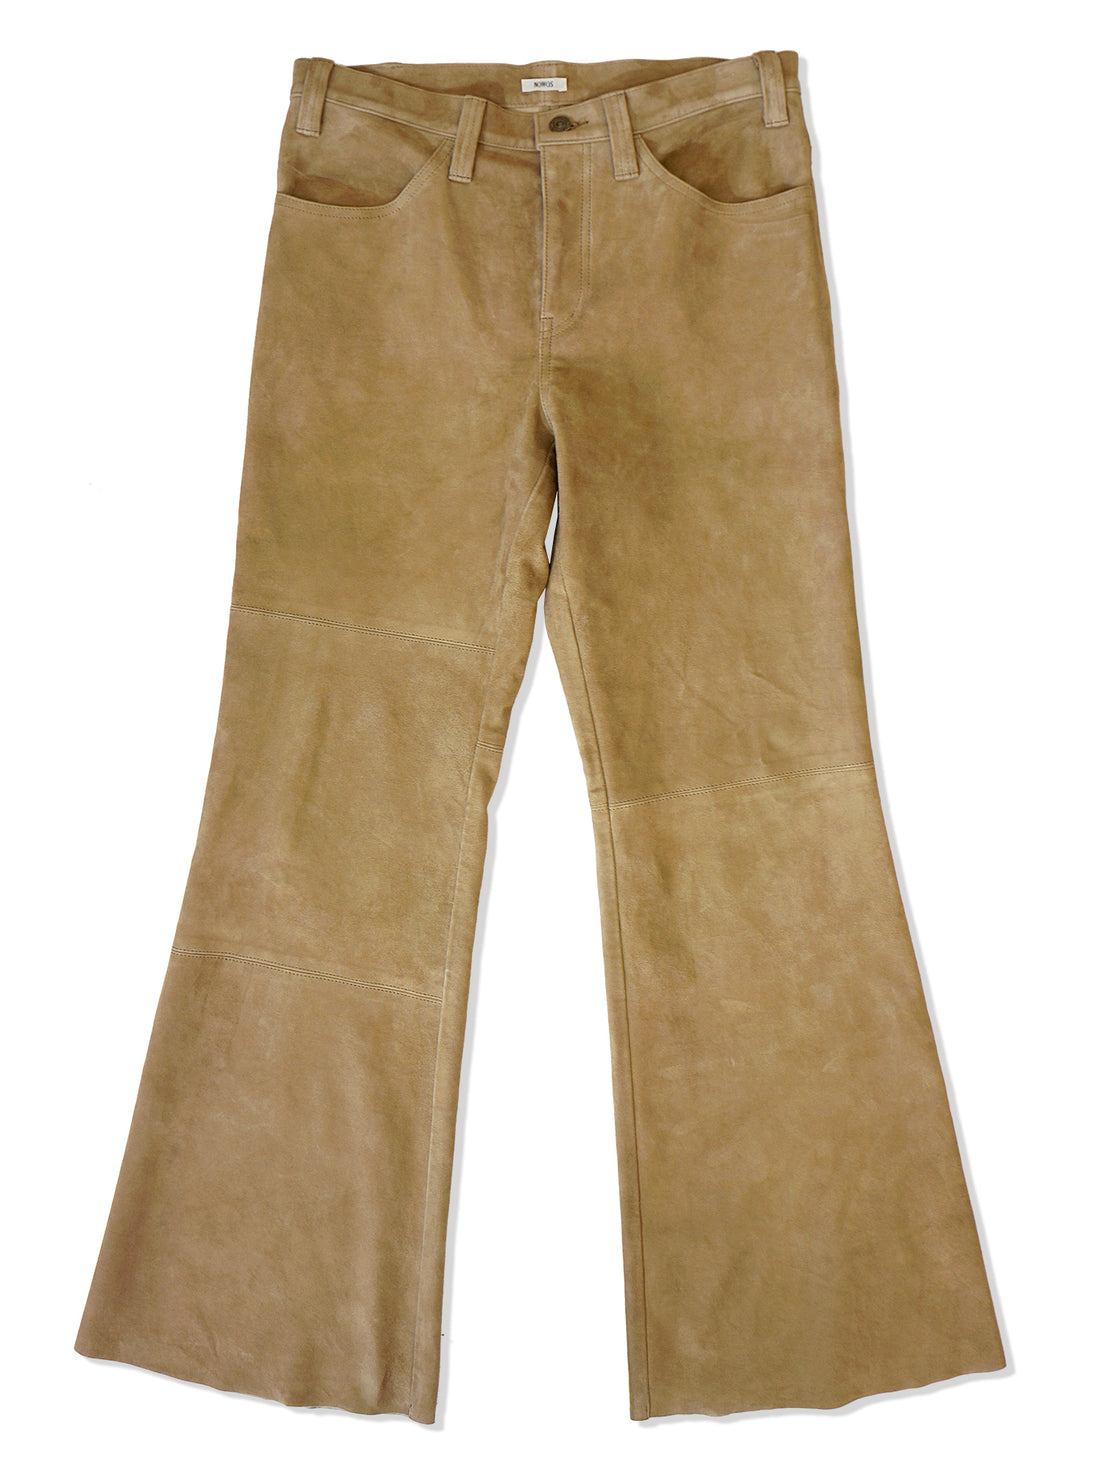 Suede Flare Pants (NOWOS)